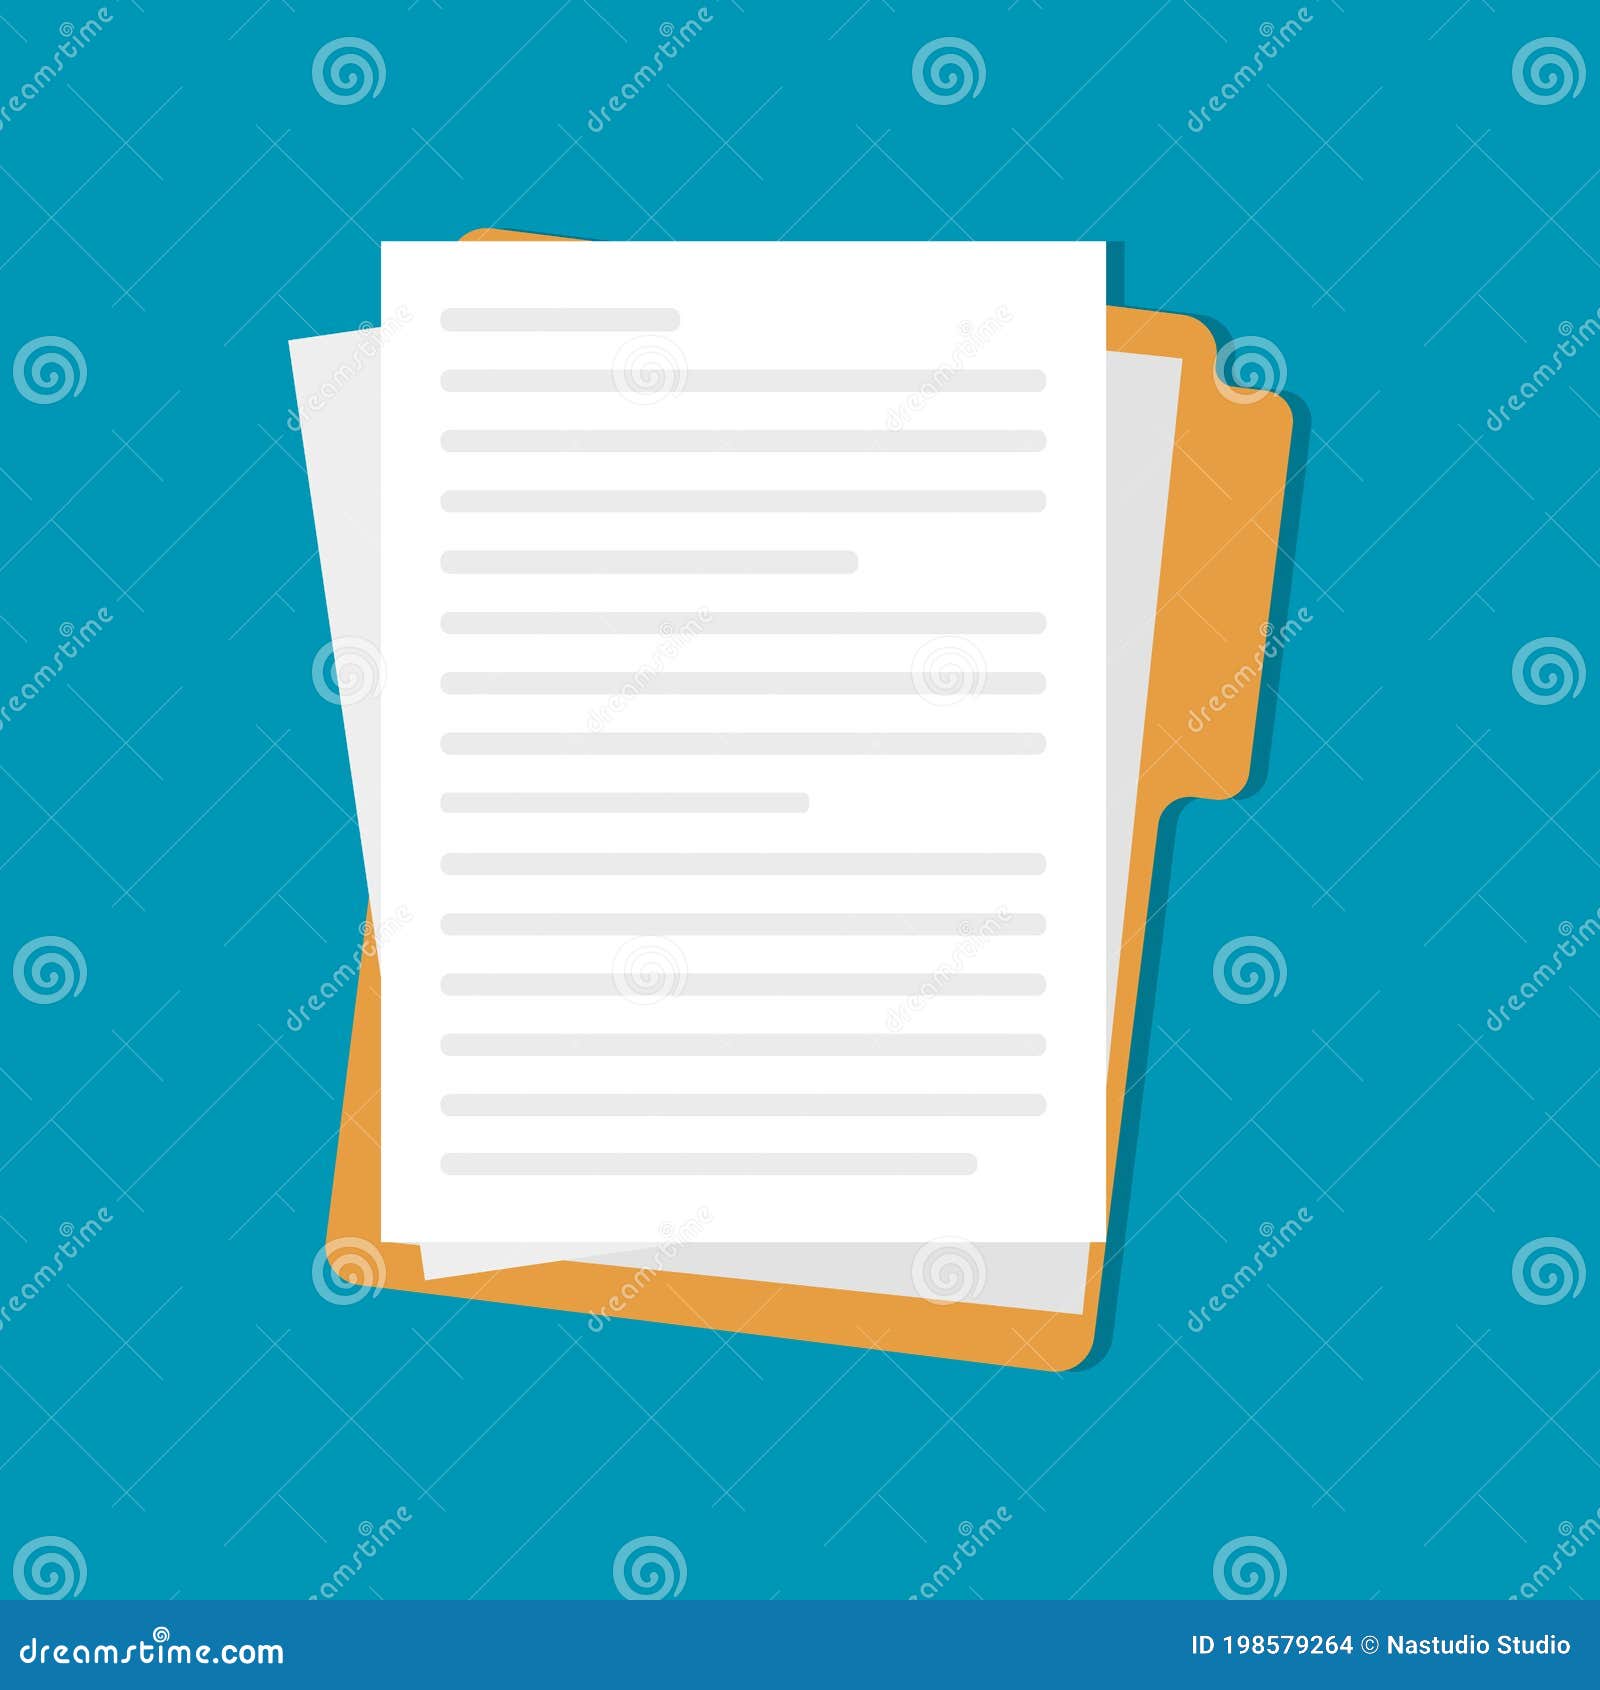 Contract Papers. Document Icon. Folder and Text Stock Vector ...